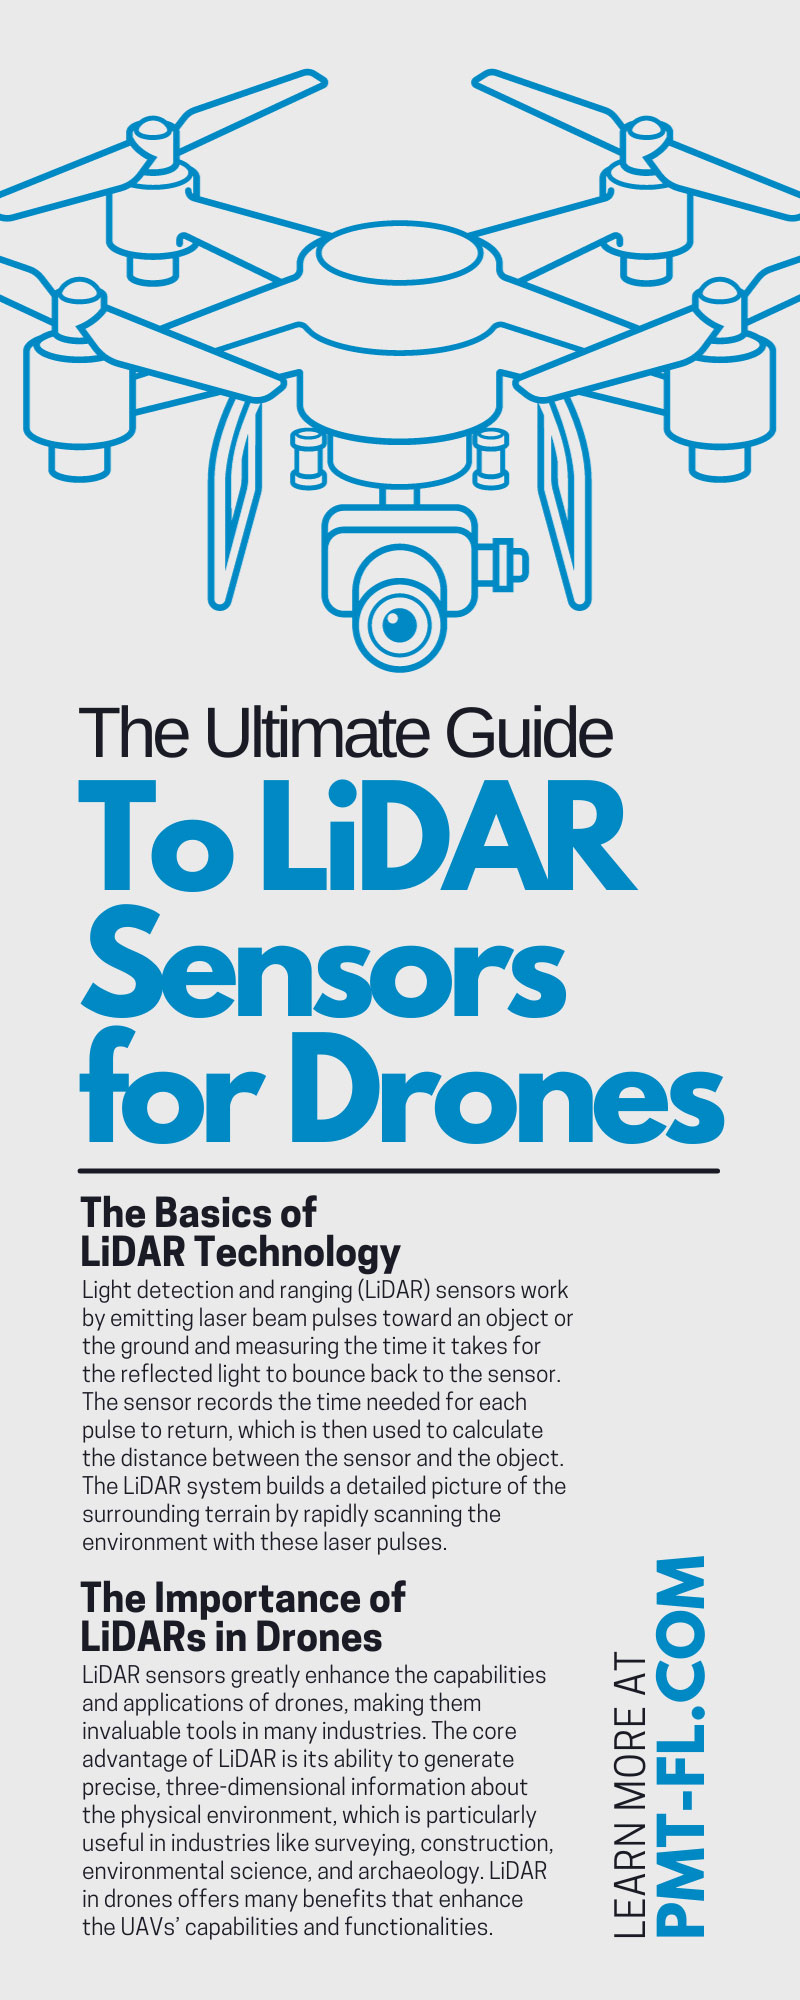 The Ultimate Guide to LiDAR Sensors for Drones 